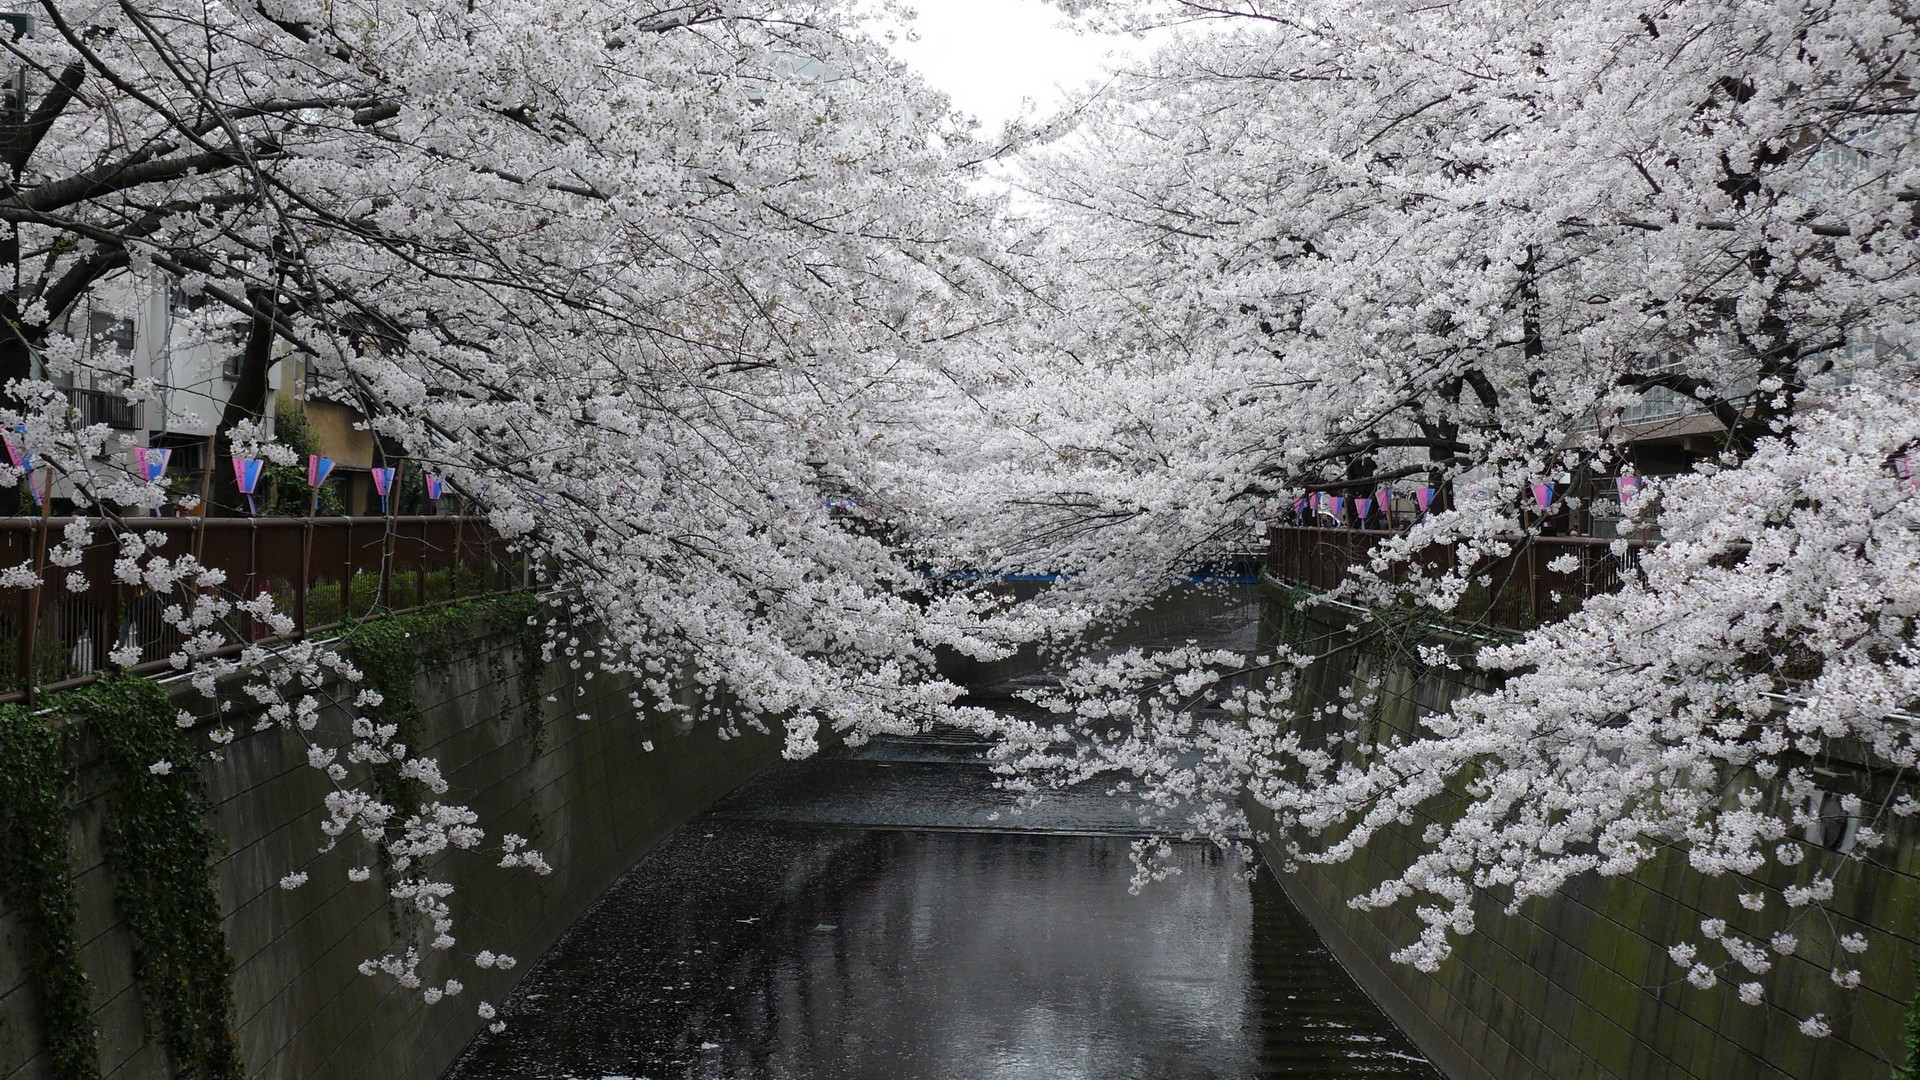 General 1920x1080 city urban cherry blossom water trees Asia Japan canal plants